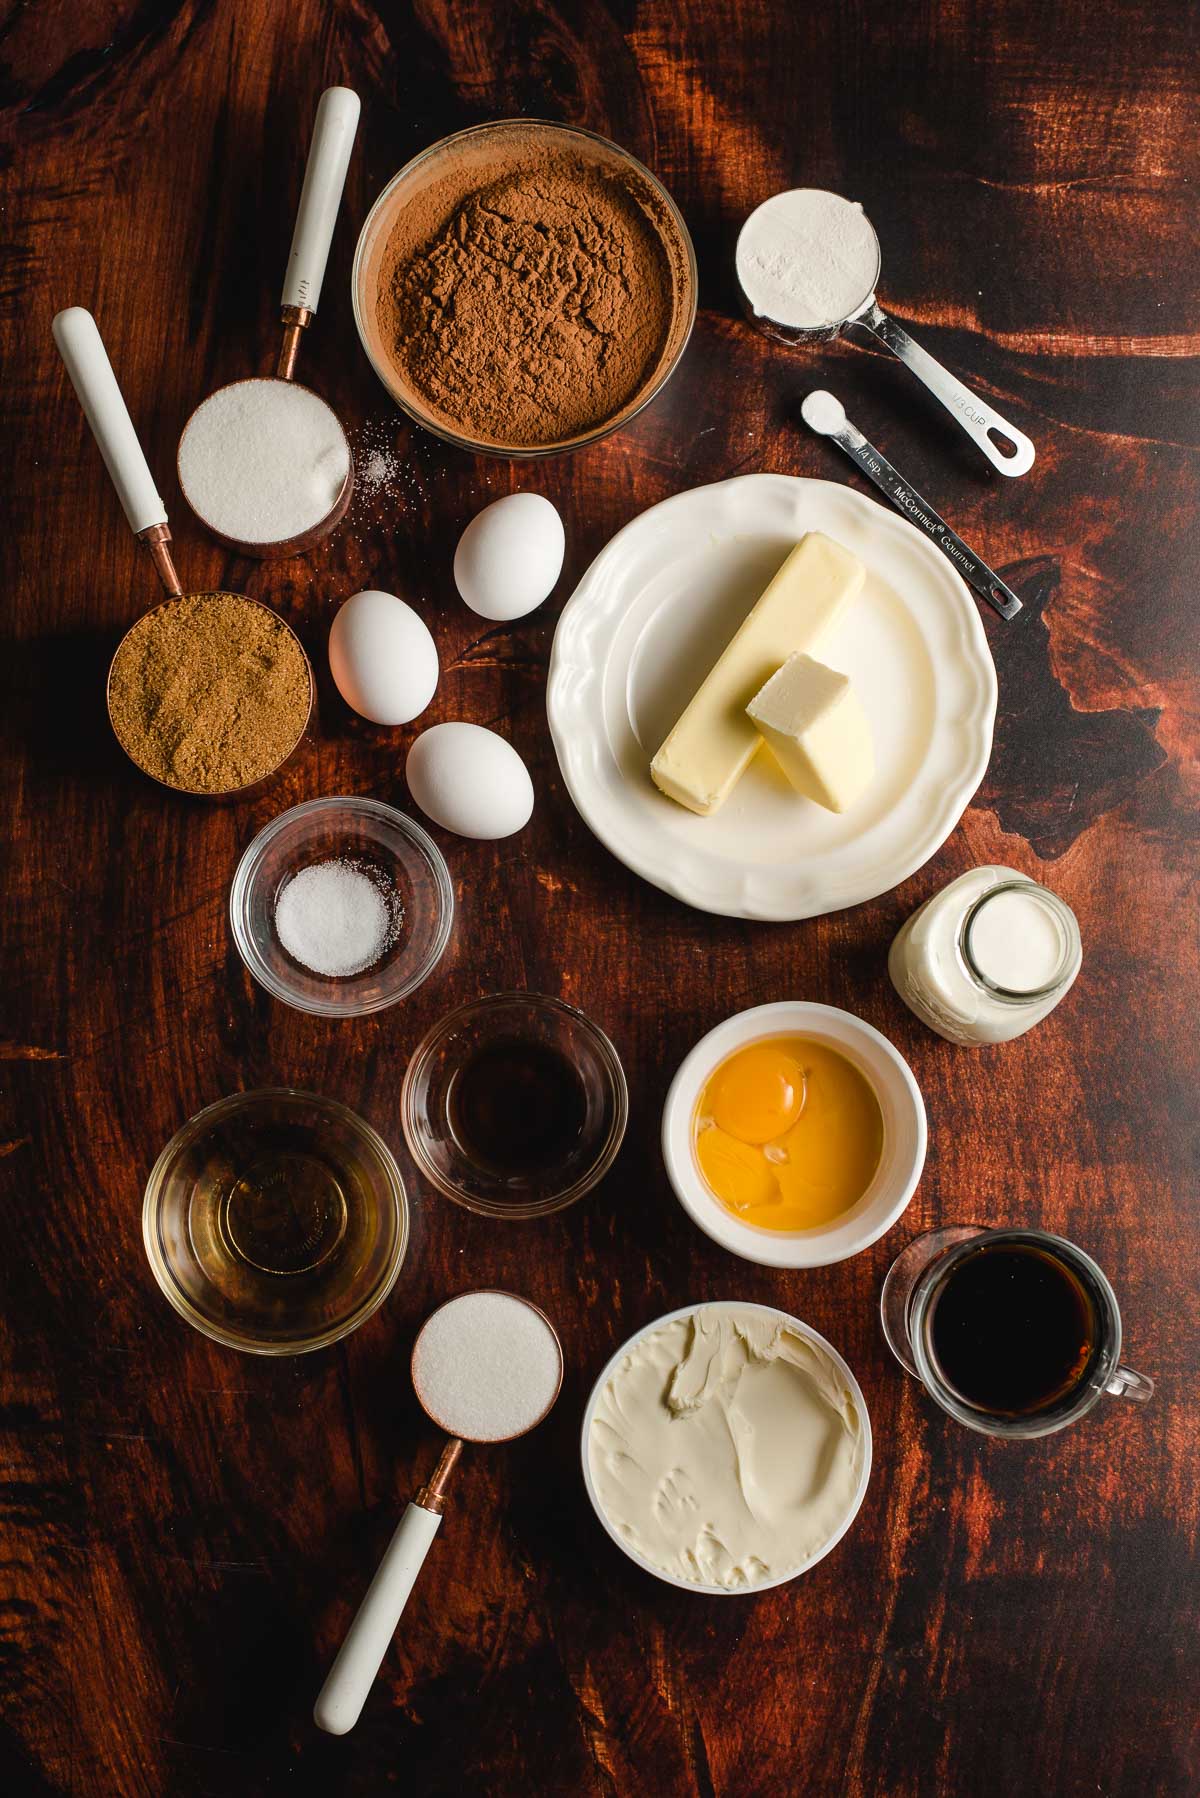 Ingredients for brownies on a wood background, including eggs, sugar, butter, flour, salt, and cocoa powder.